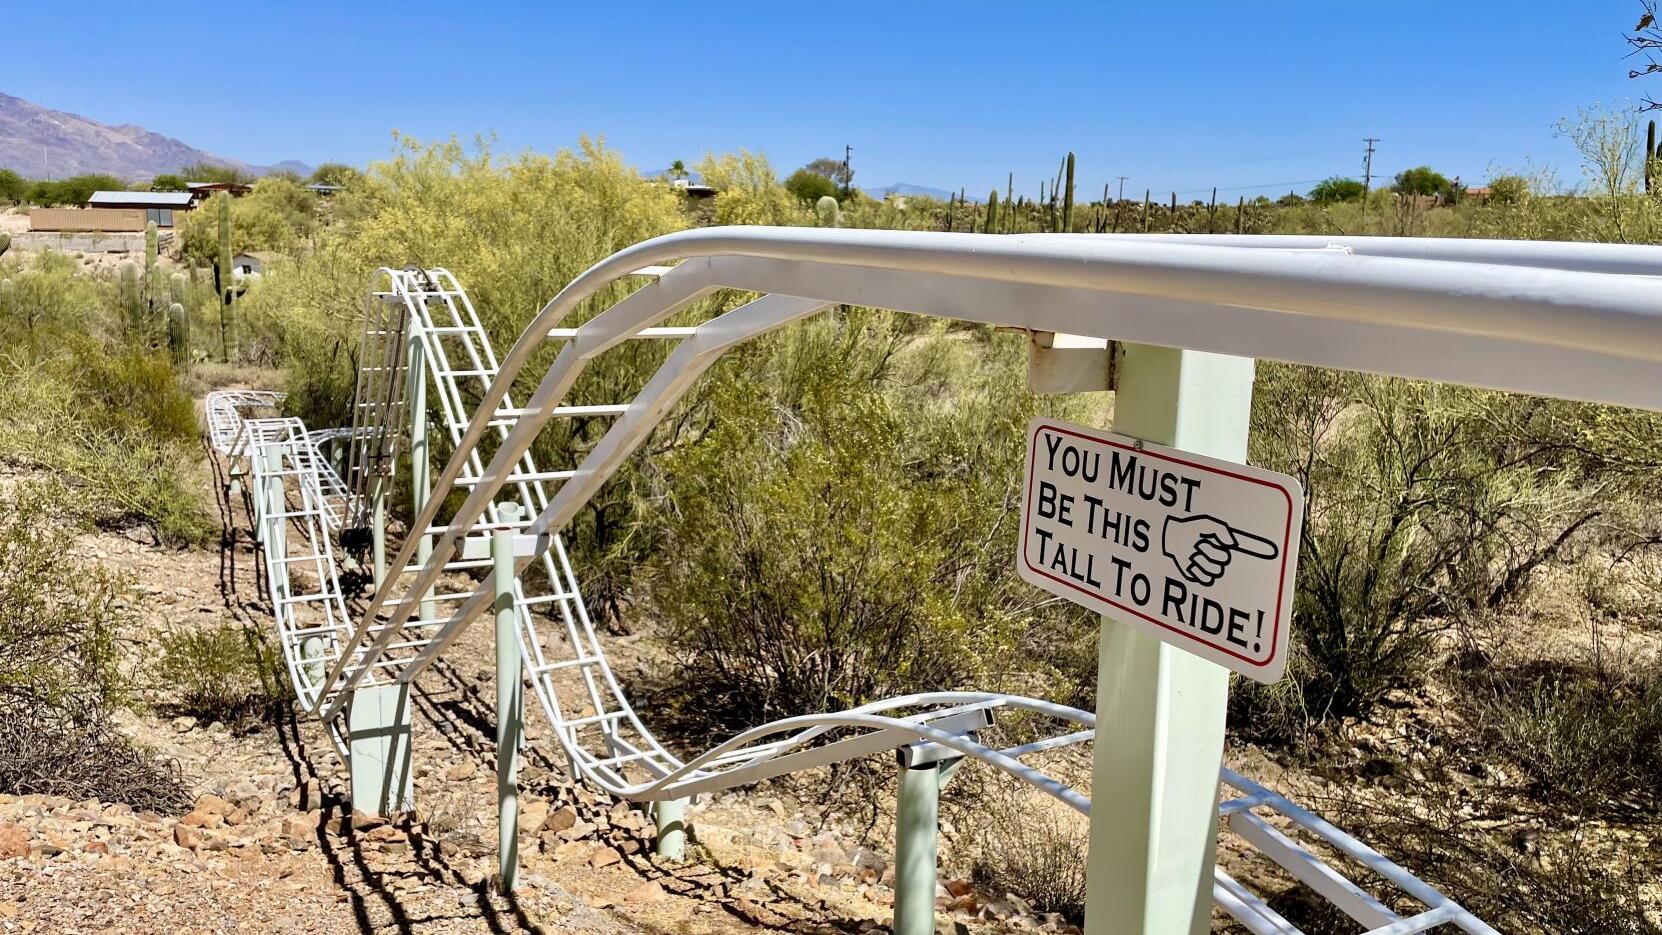 This Tucson grandfather built a roller coaster in his yard for his grandchildren 🎢